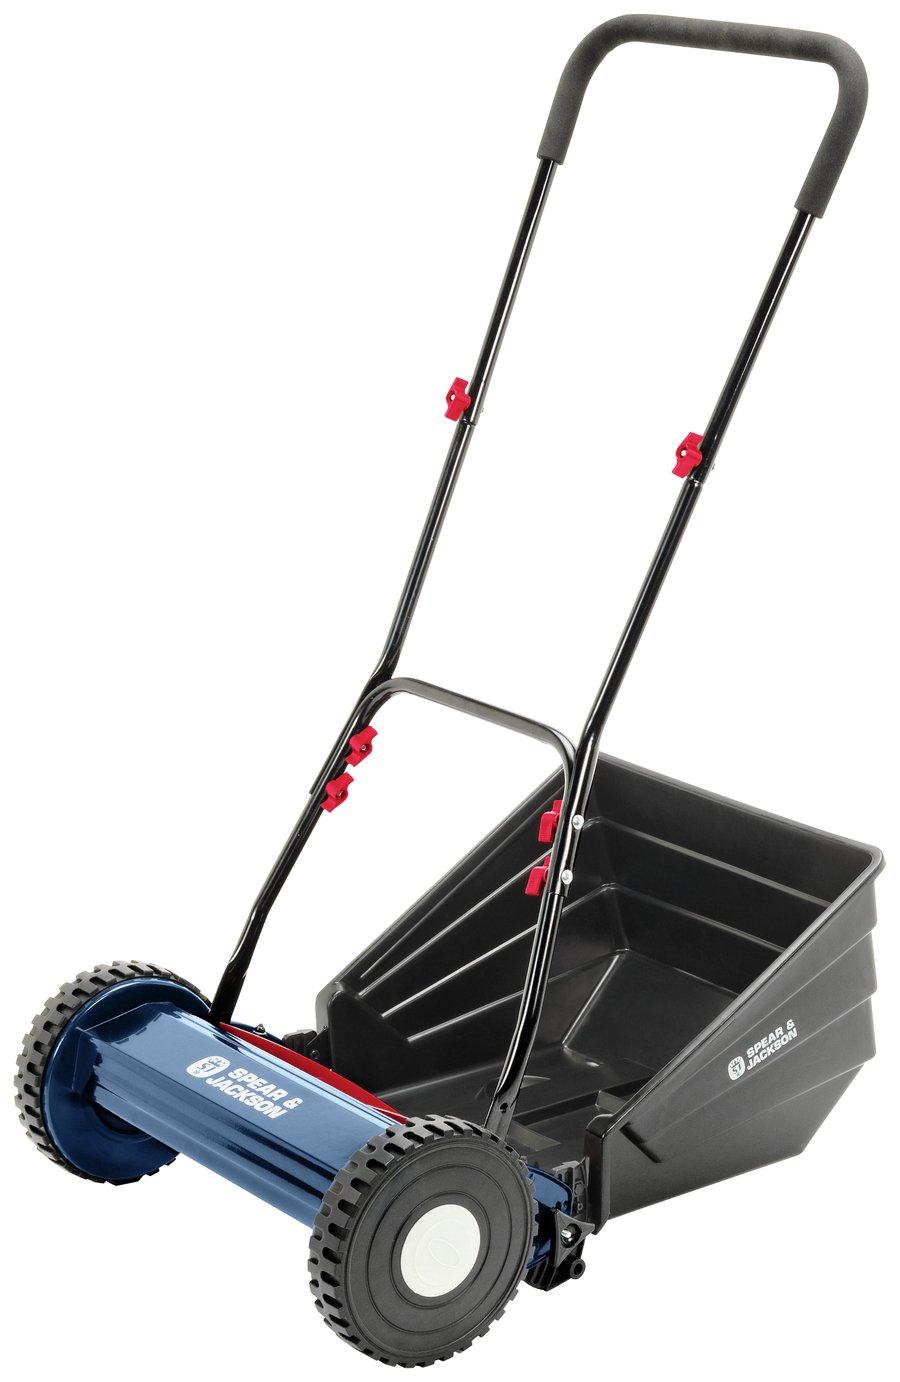 Spear & Jackson 40cm Wide Hand Push Cylinder Lawnmower at Argos review